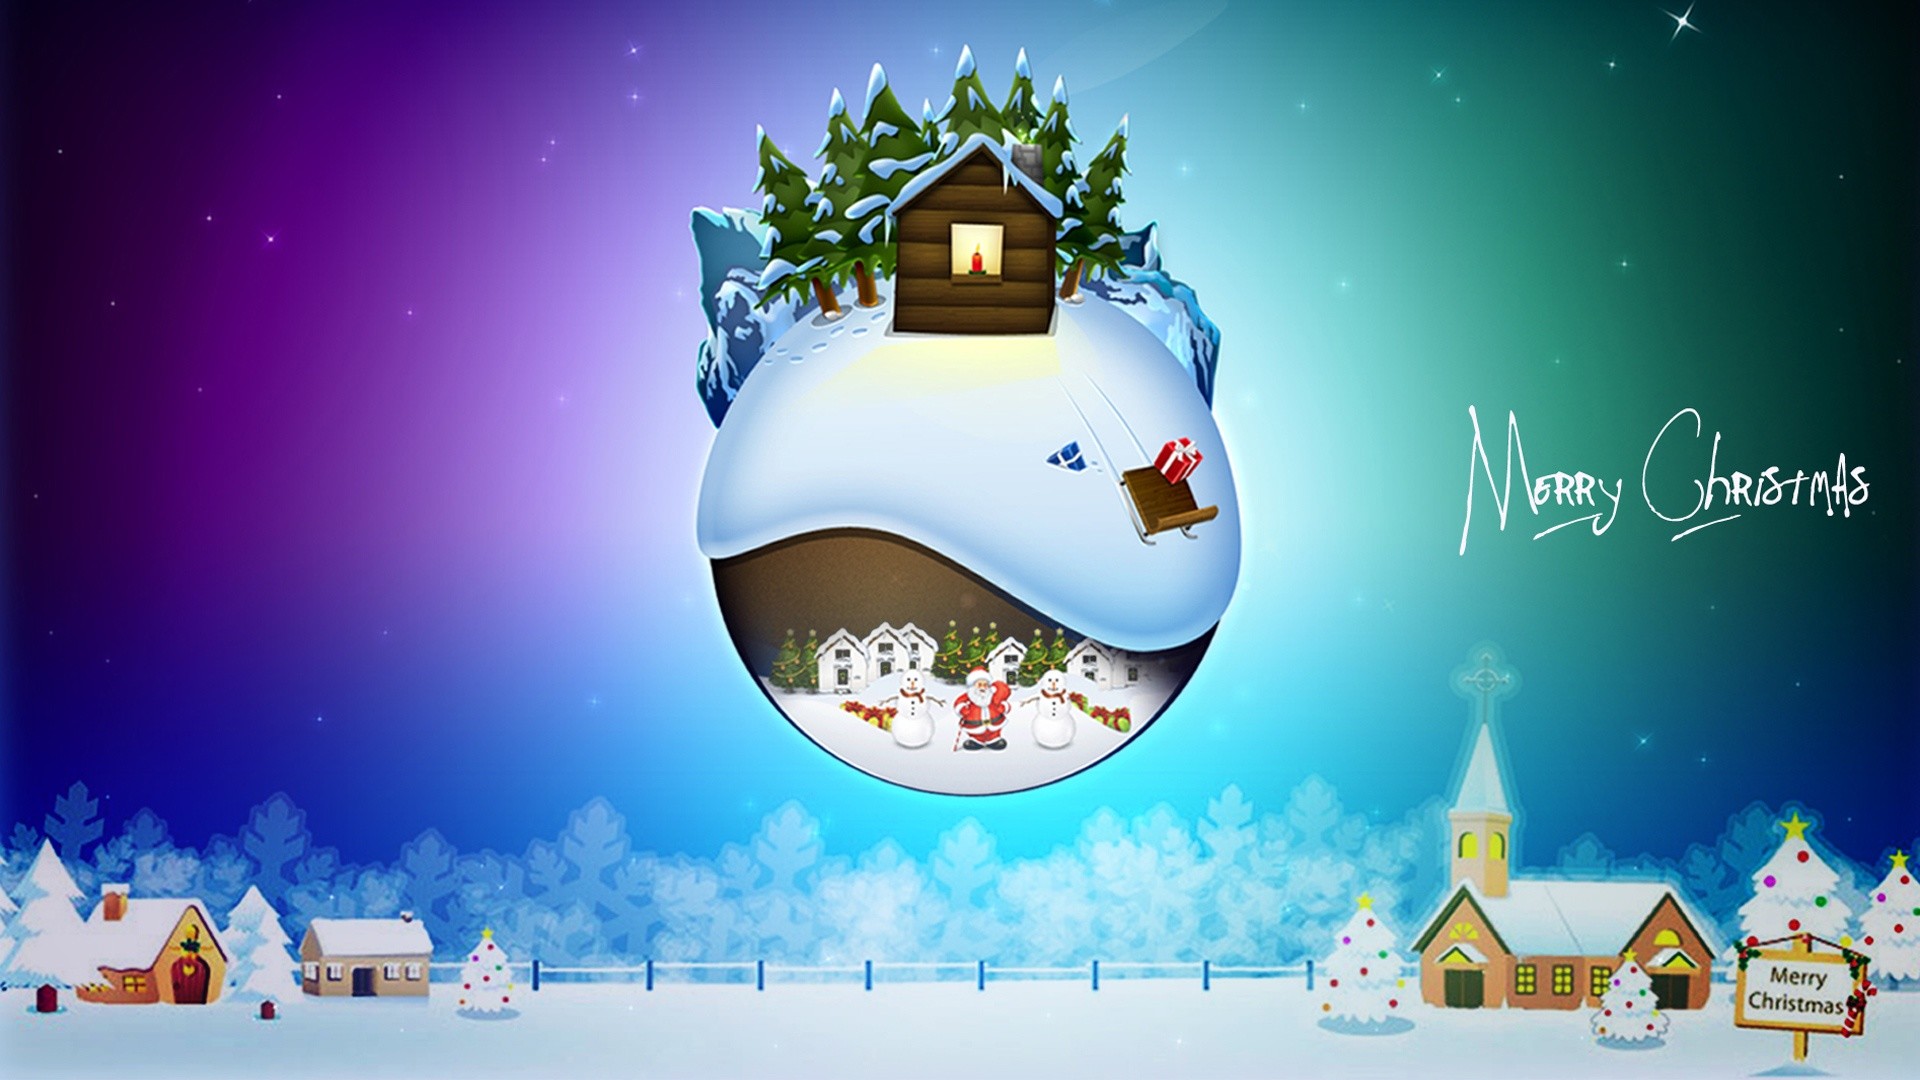 1920x1080 Tag: merry christmas wallpapers